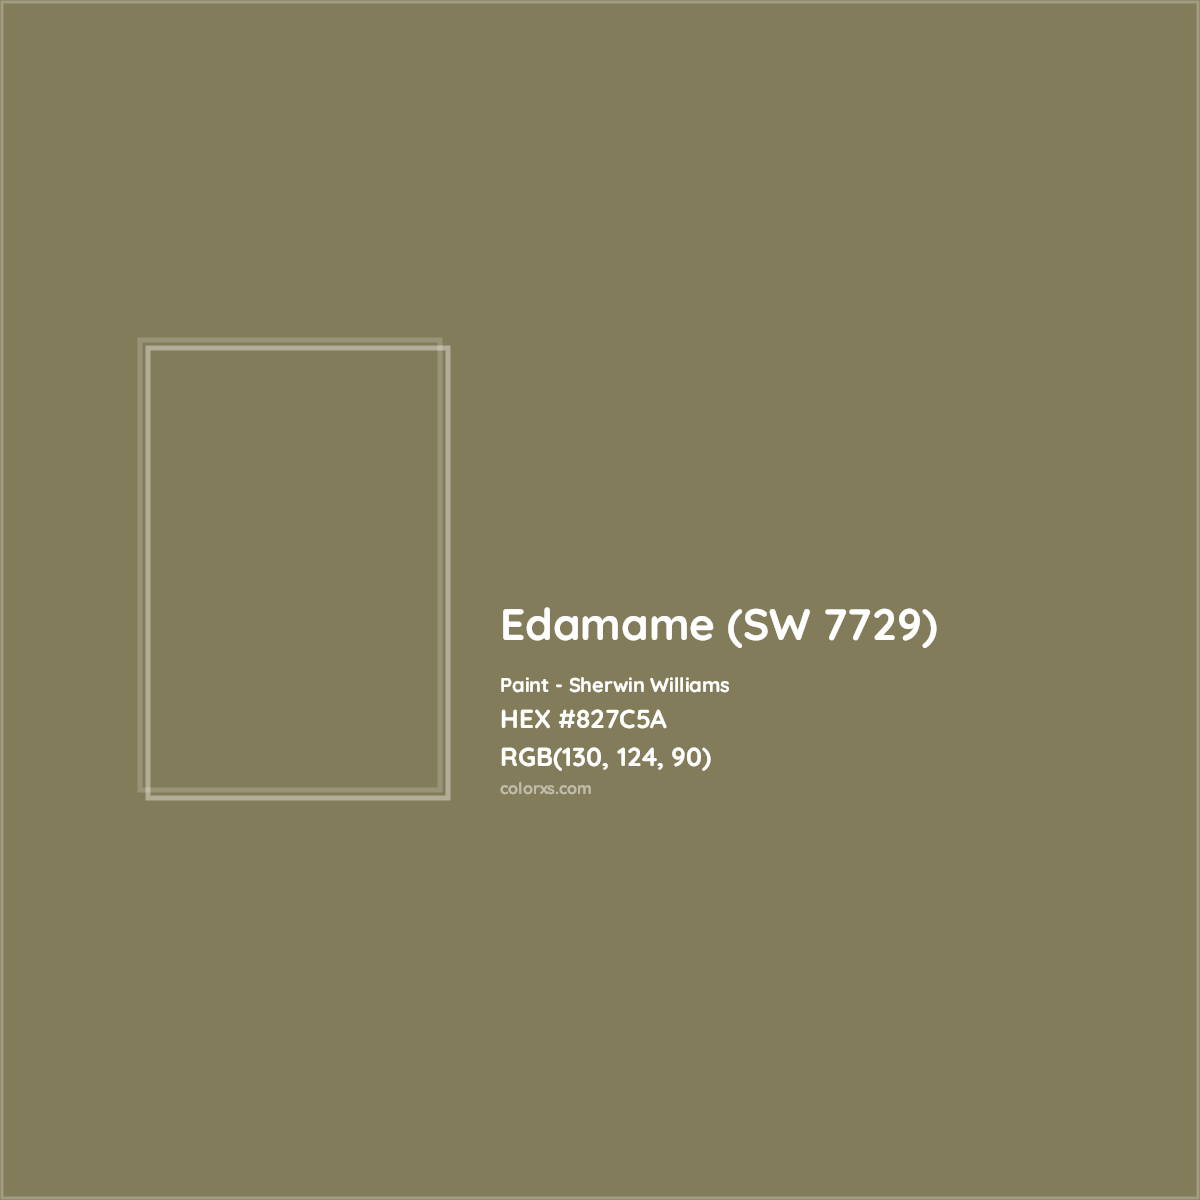 HEX #827C5A Edamame (SW 7729) Paint Sherwin Williams - Color Code